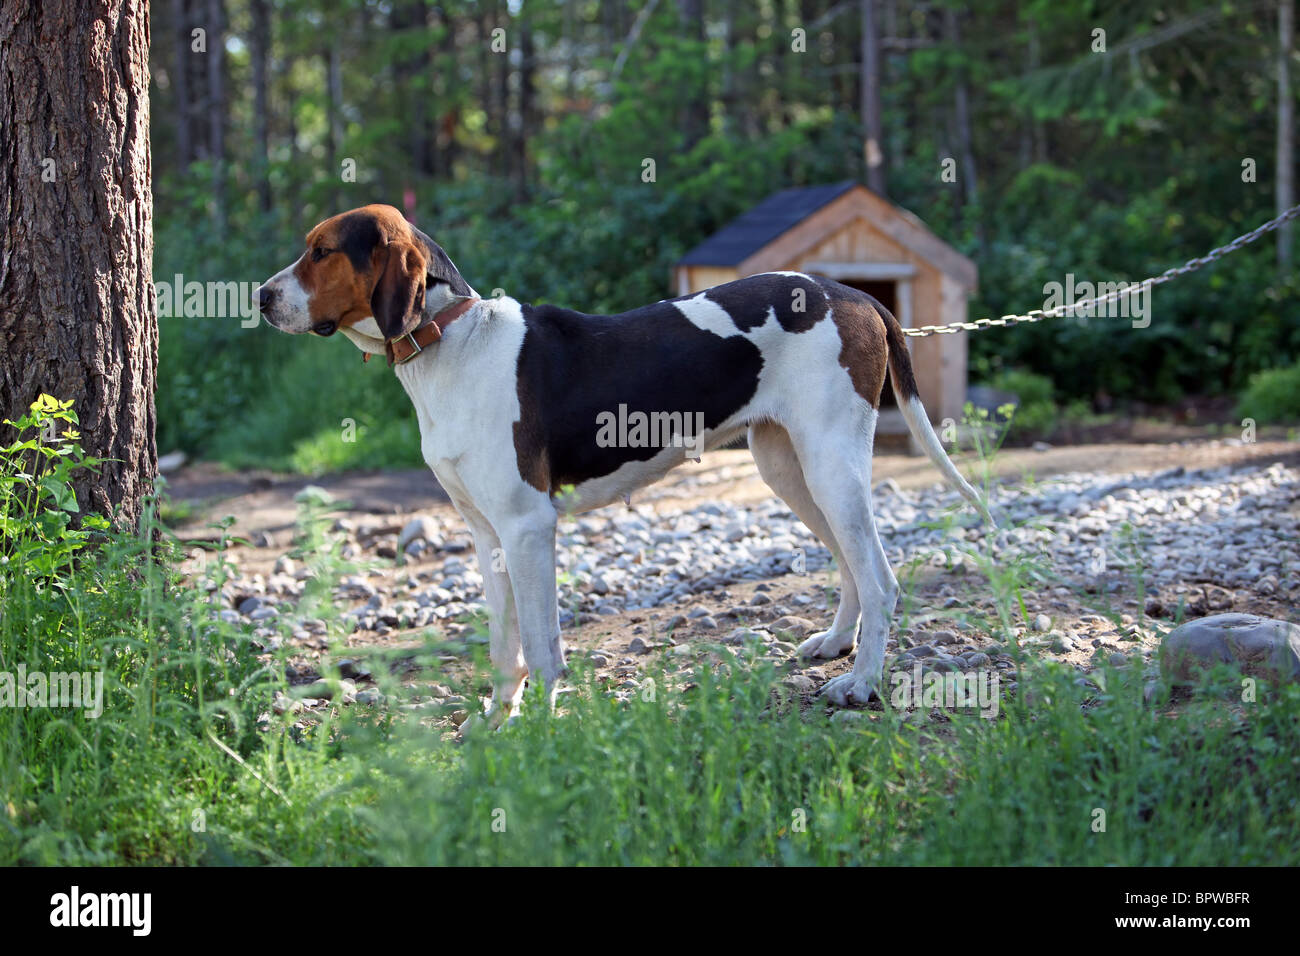 Hound dog used for hunting raccoons and bear tied with a chain to kennel. Dog standing proud. Companion and work animal. Stock Photo